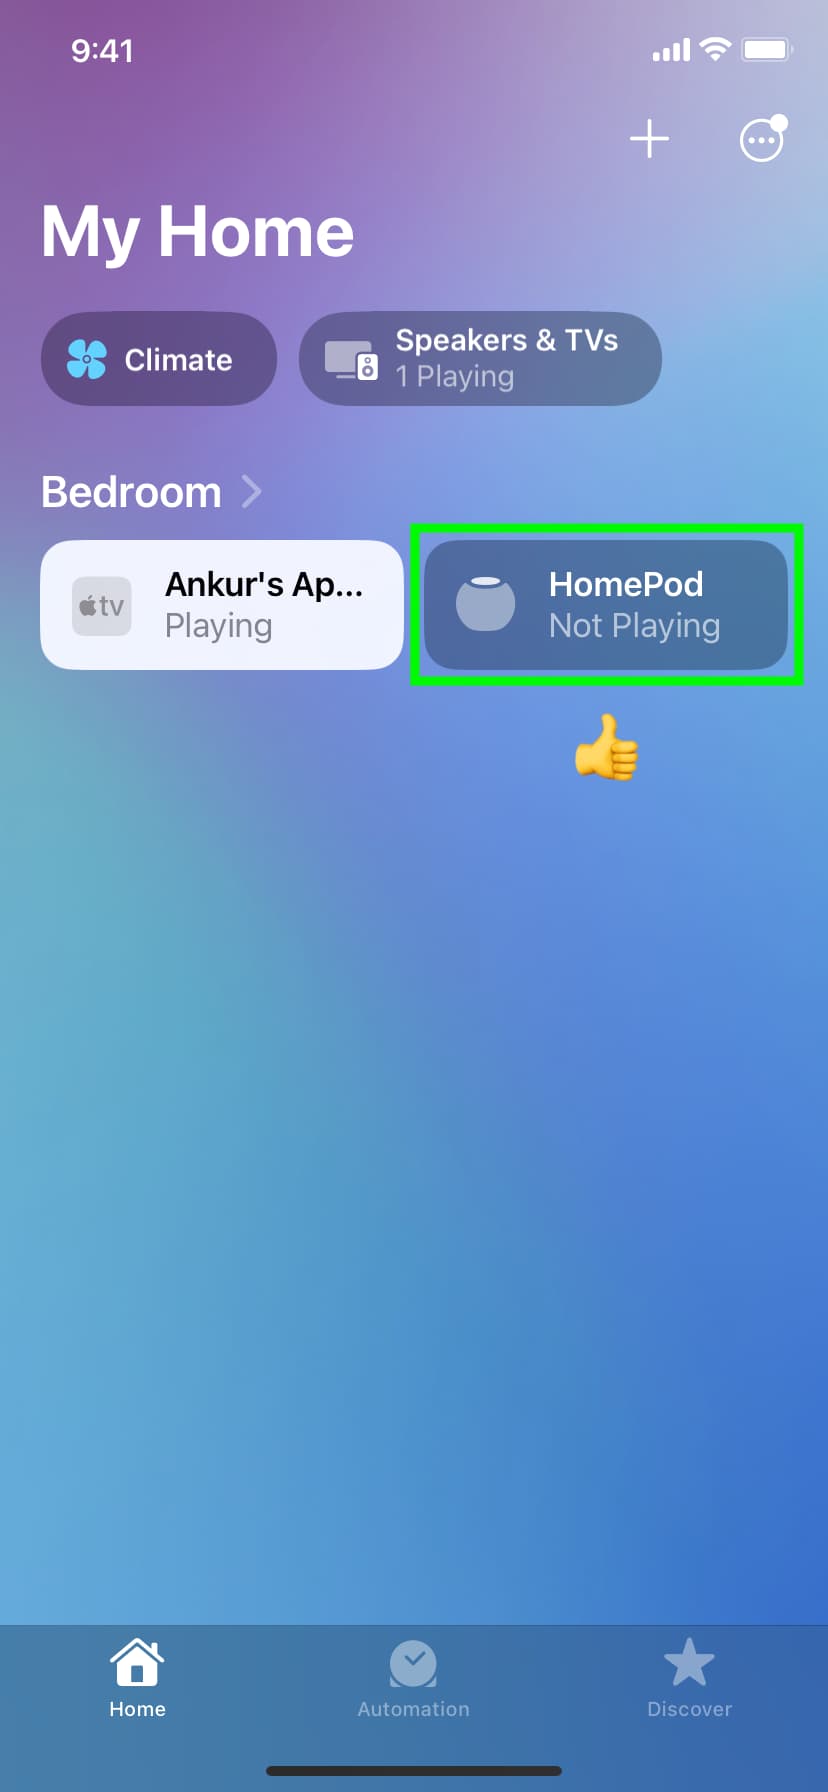 HomePod tile in iPhone Home app